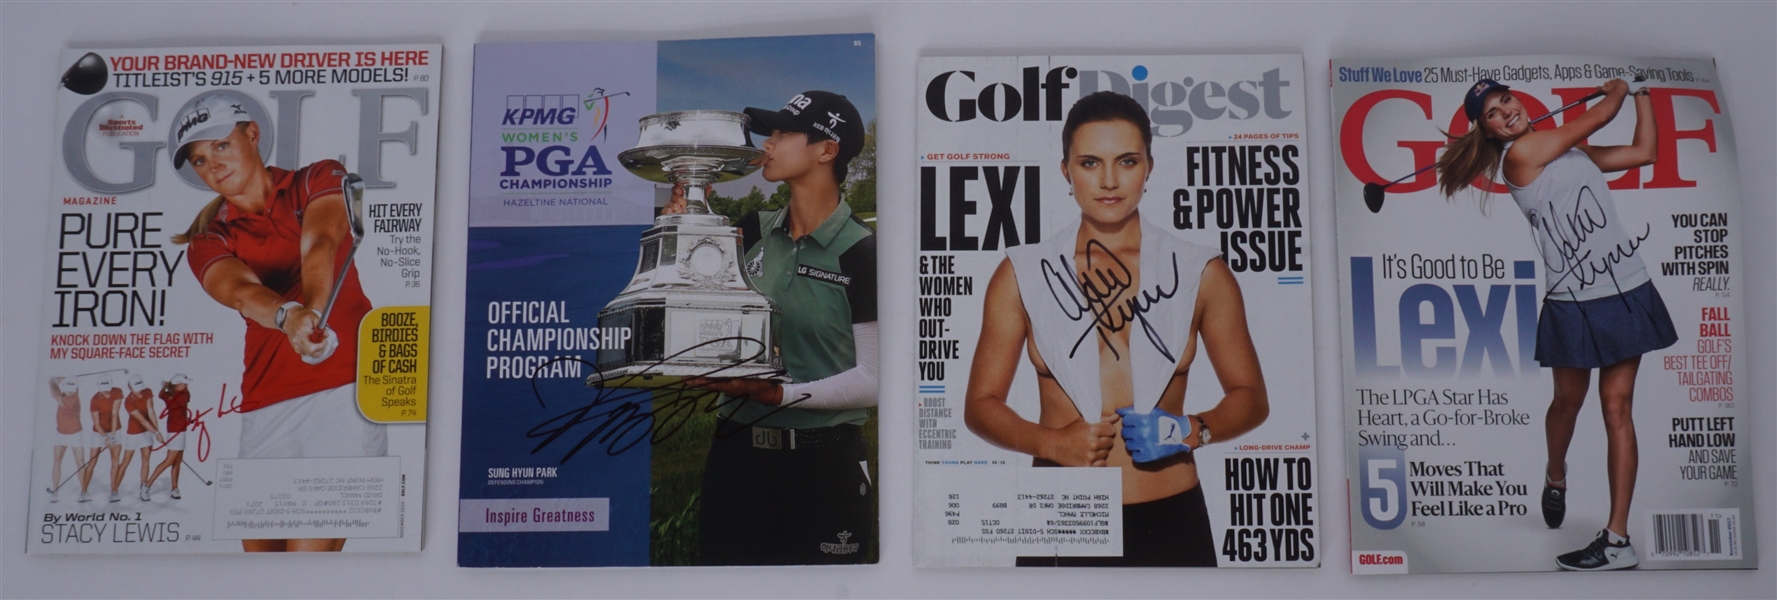 Lot of 4 Female Autographed Golf Magazines Beckett